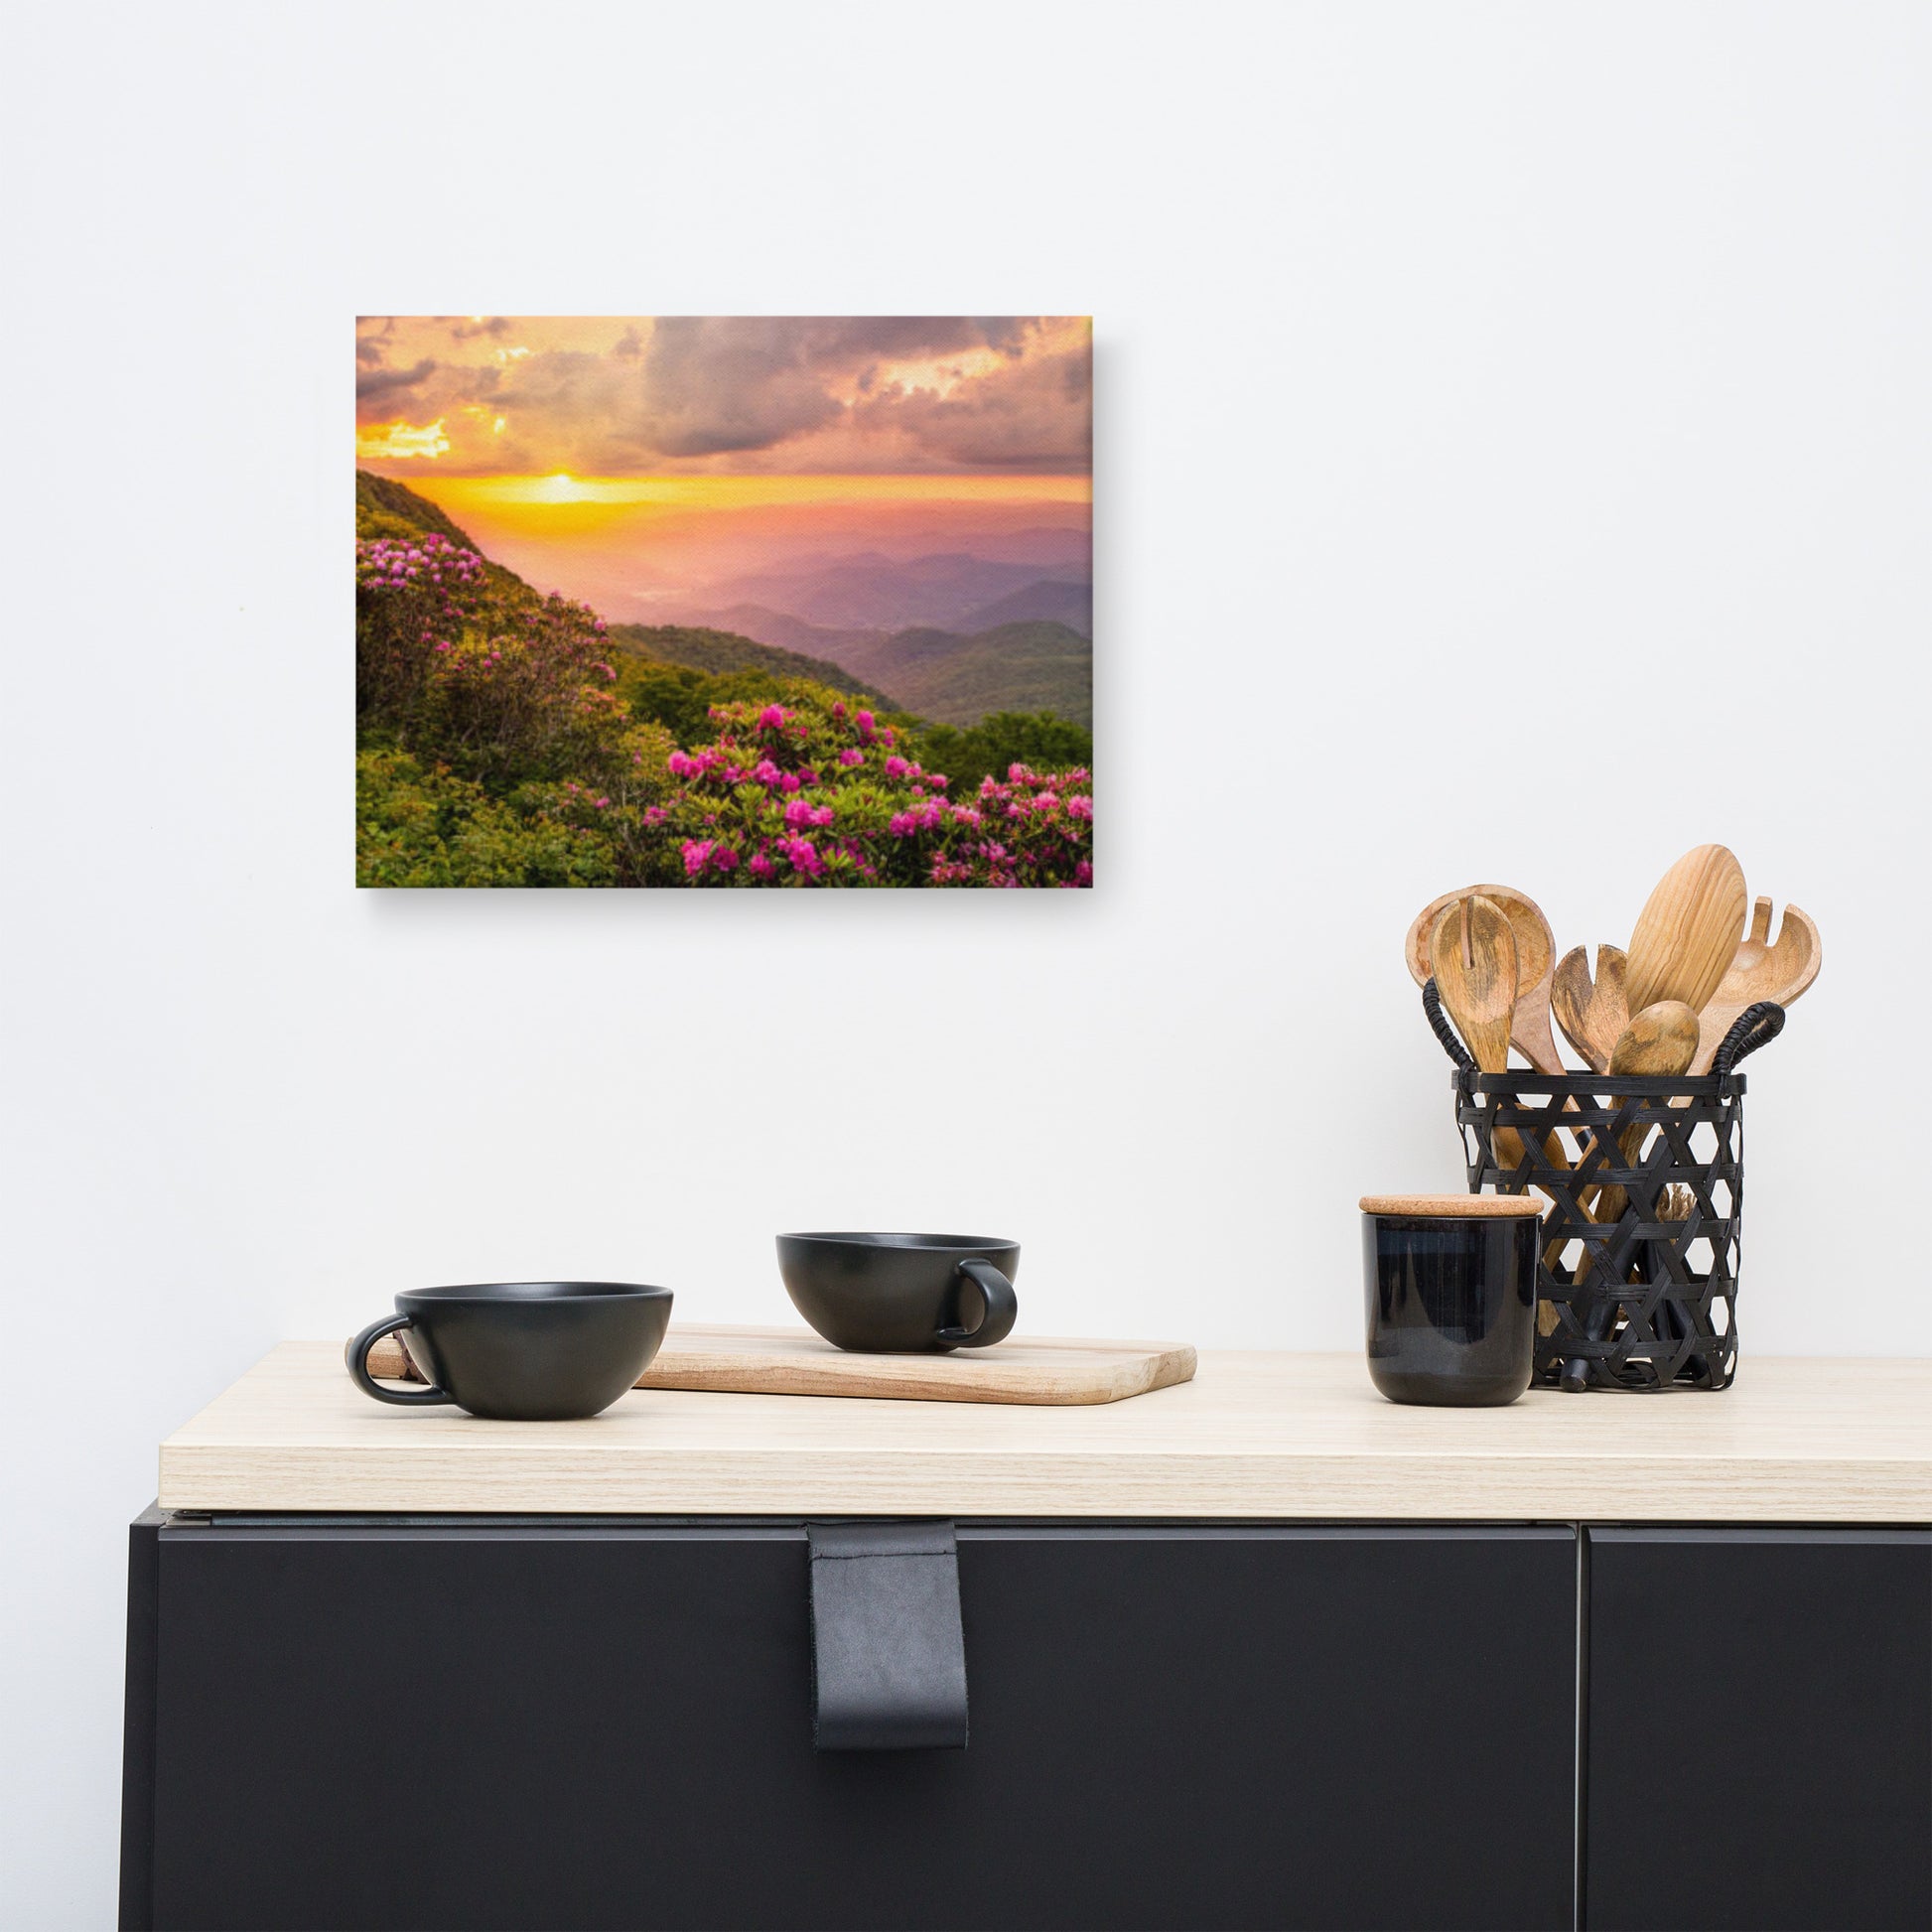 Master Bedroom Art Above Bed: Close of the Day - Appalachian Mountains Sunset - Floral / Botanical / Rustic Landscape Photograph Asheville North Carolina Blue Ridge Parkway